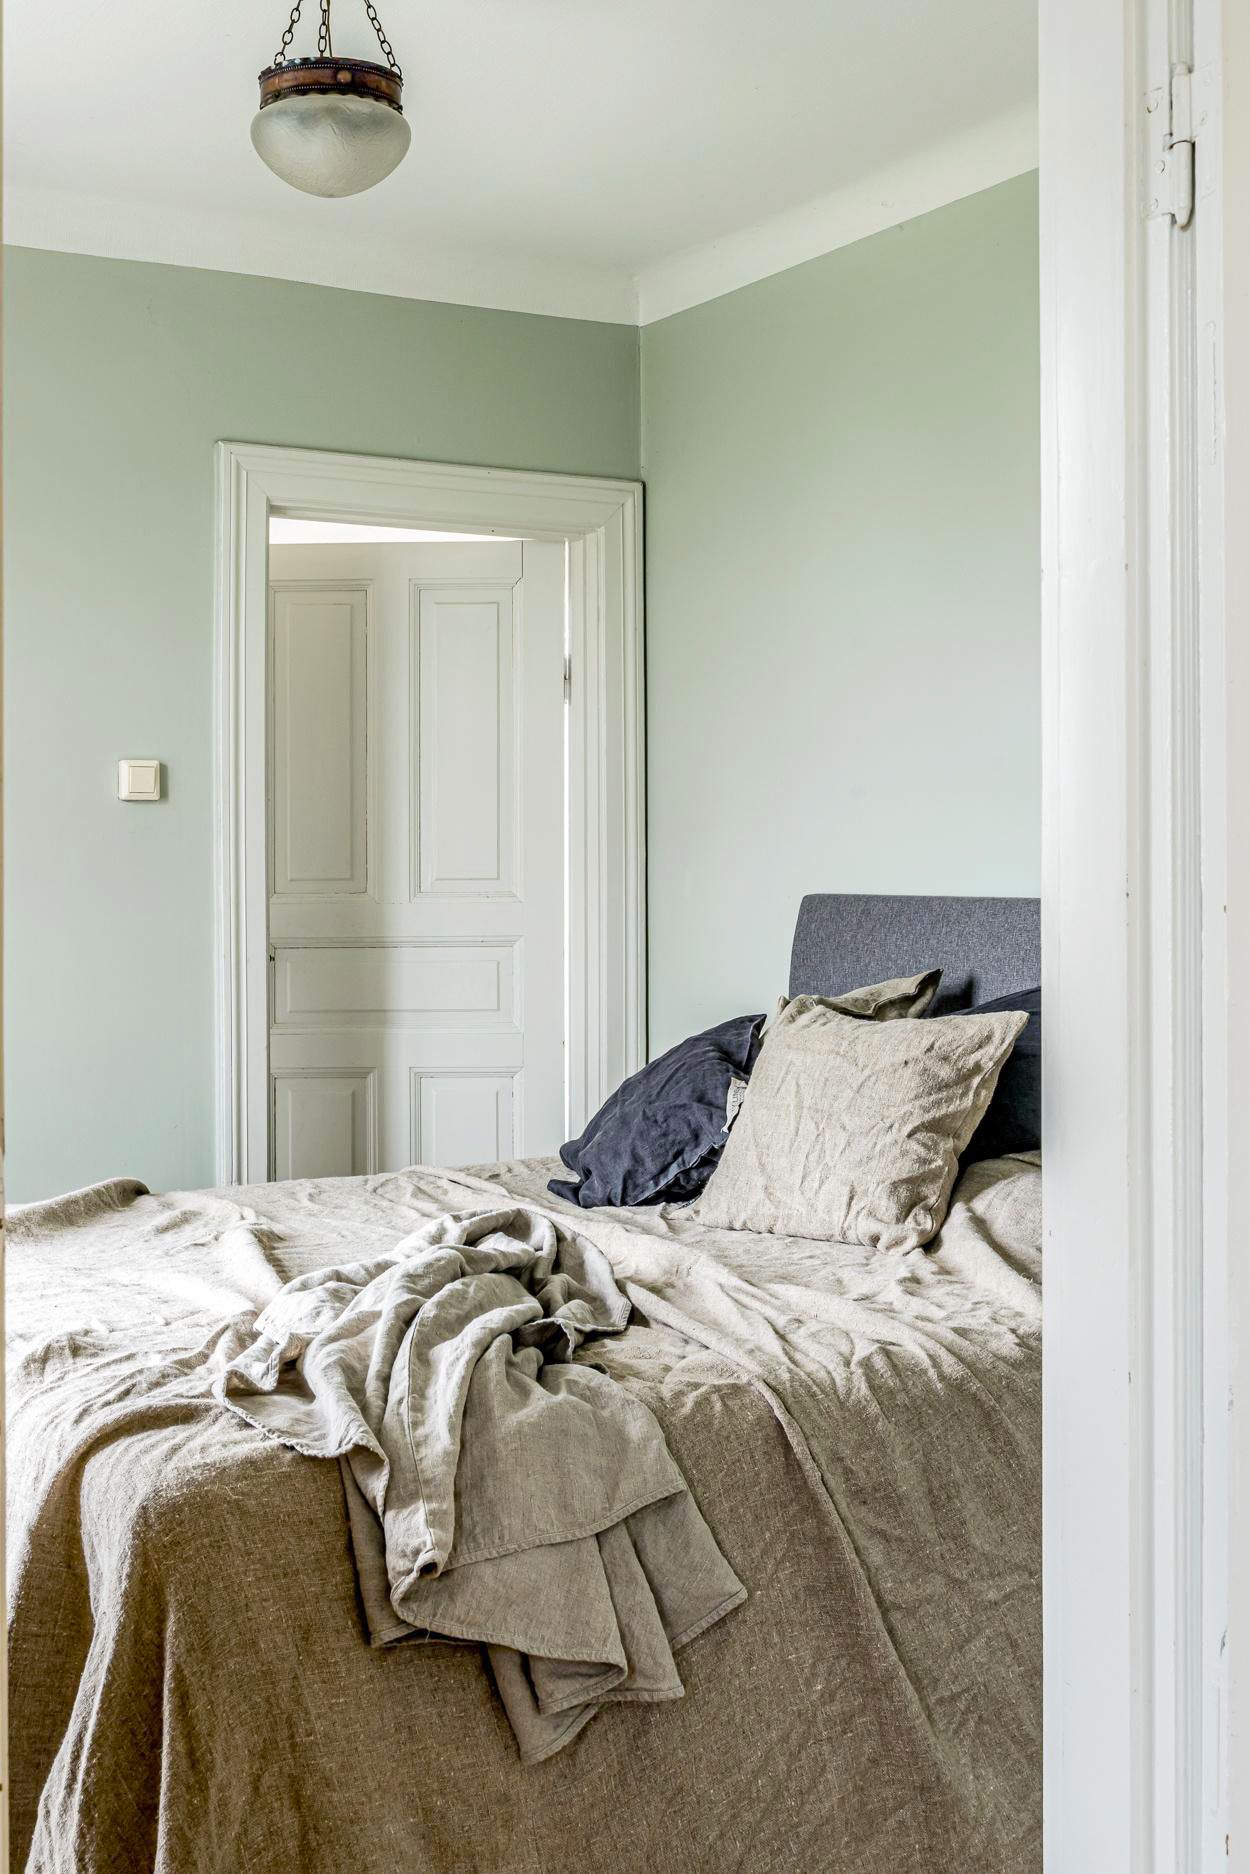 20 Calming Colors - Soothing and Relaxing Paint Colors for Every